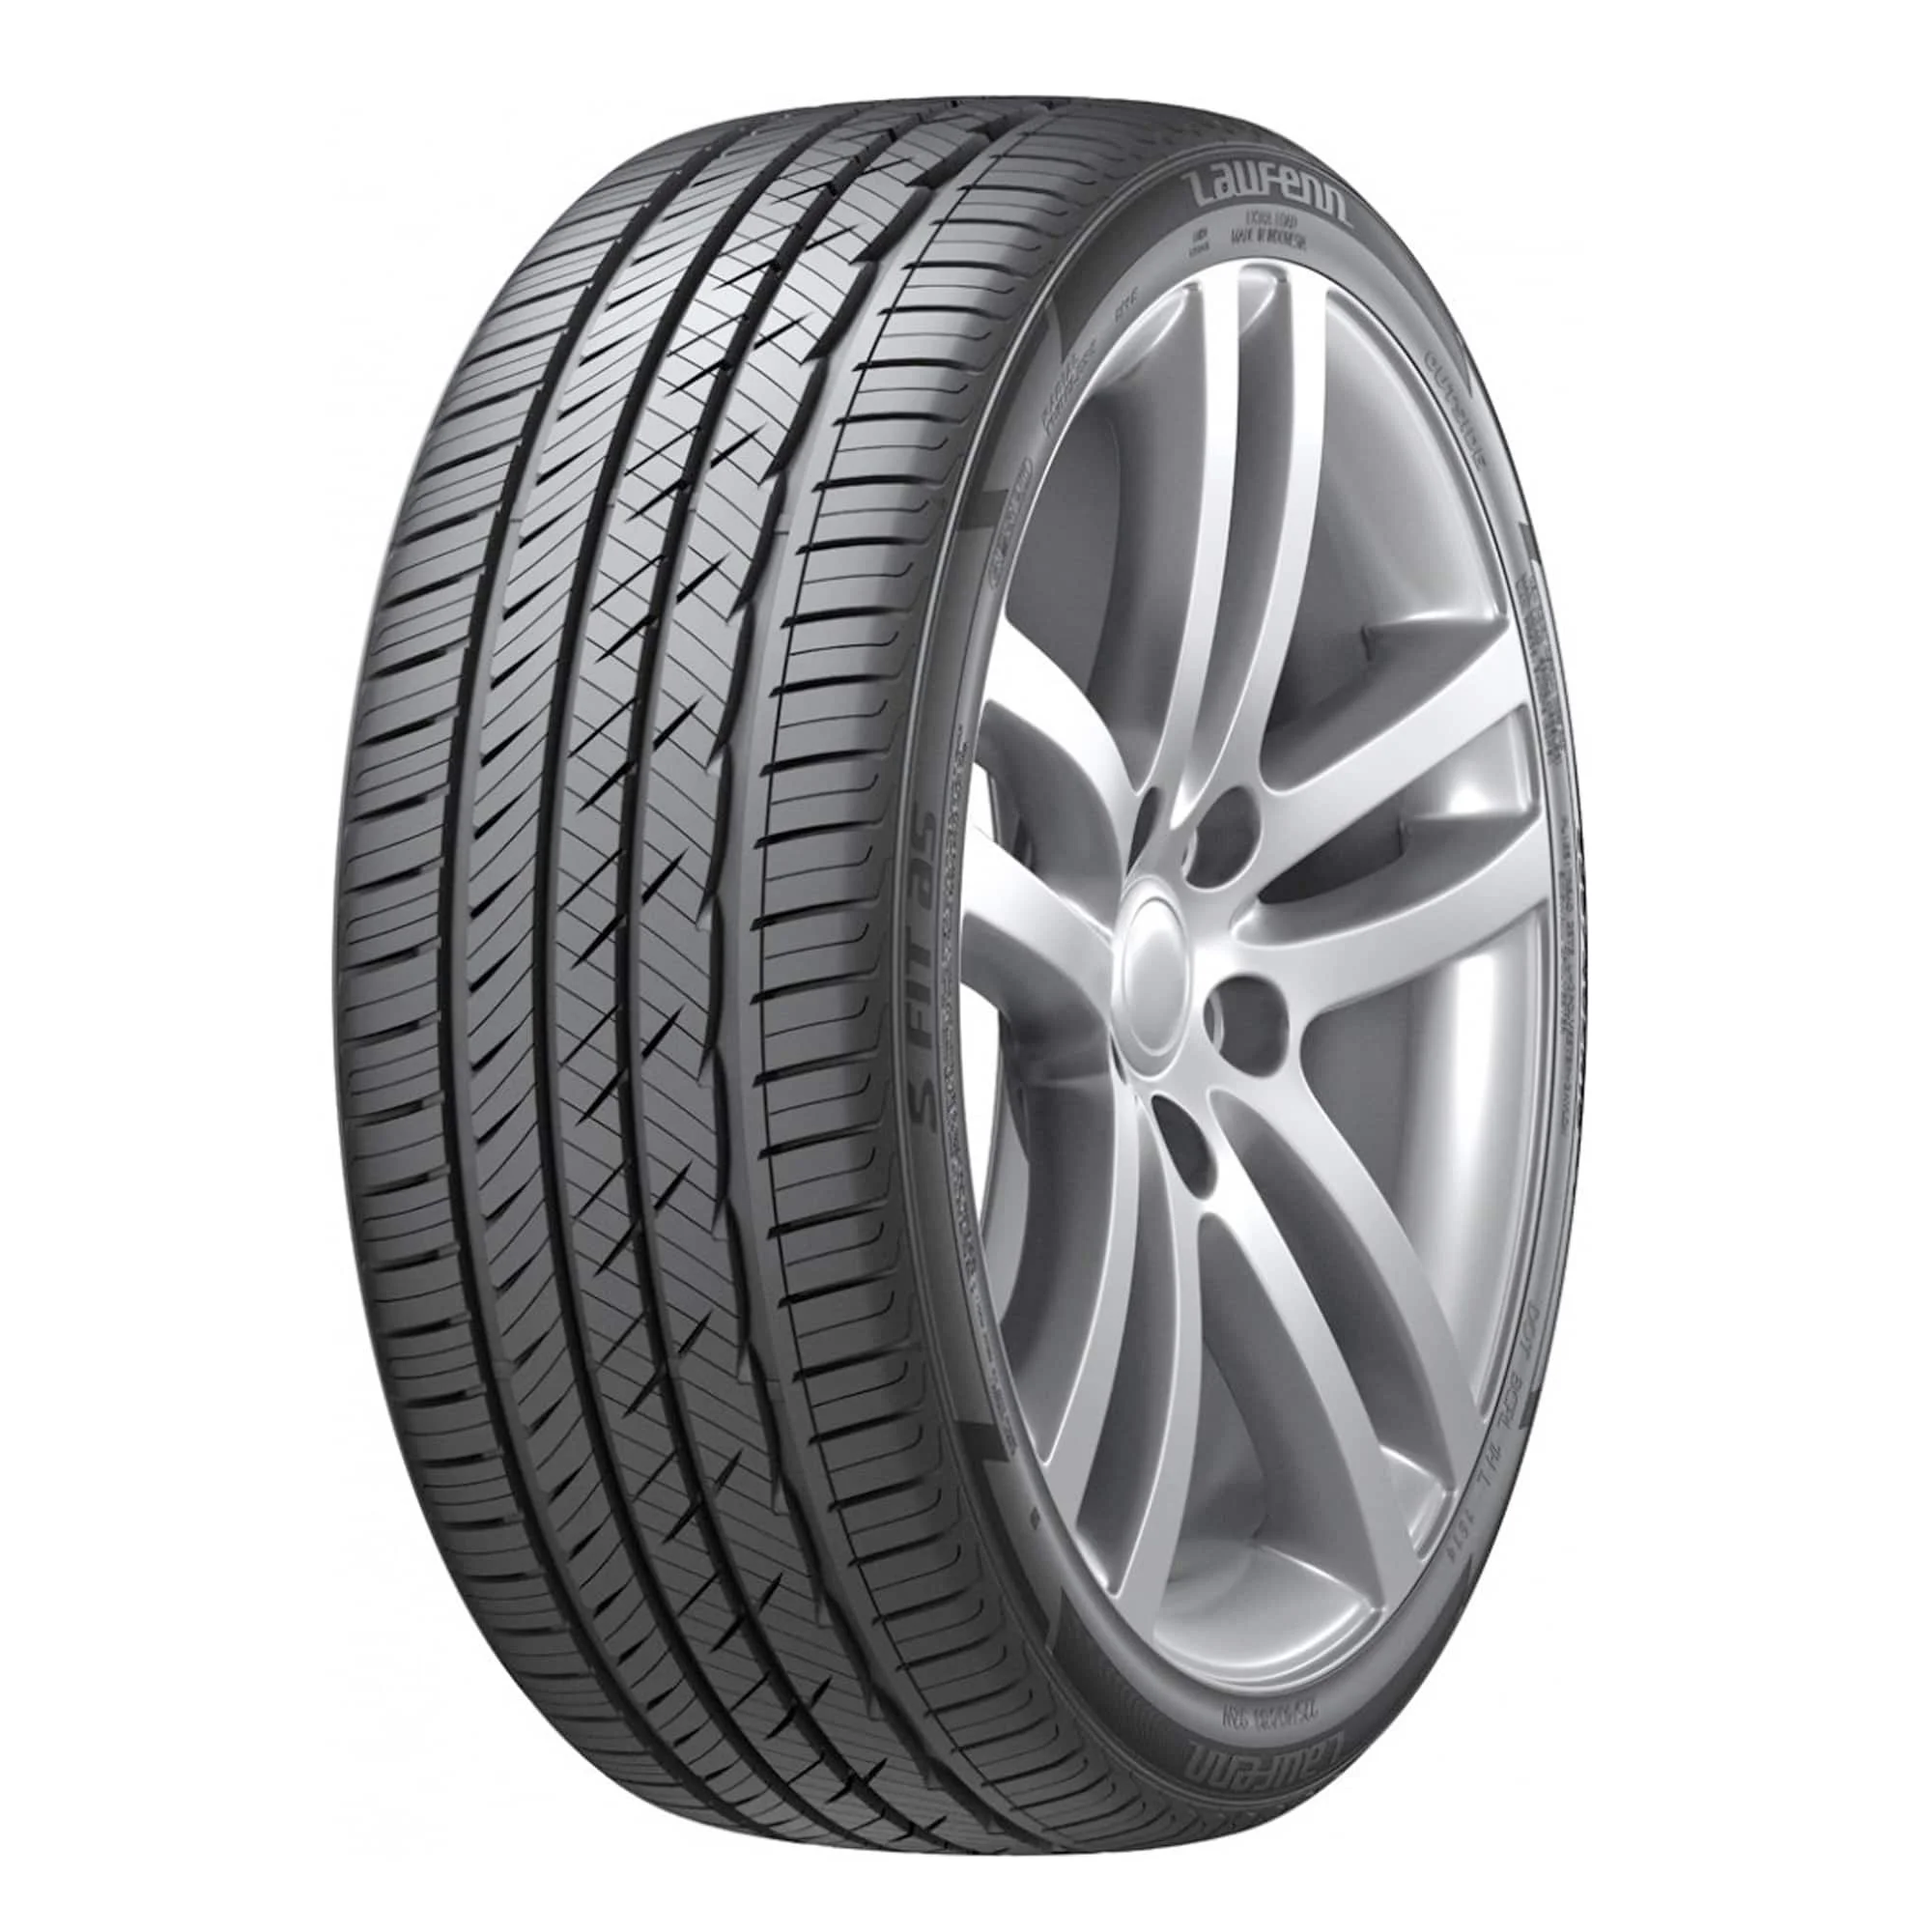 Шина 225/50R18 95W S FIT AS LH01